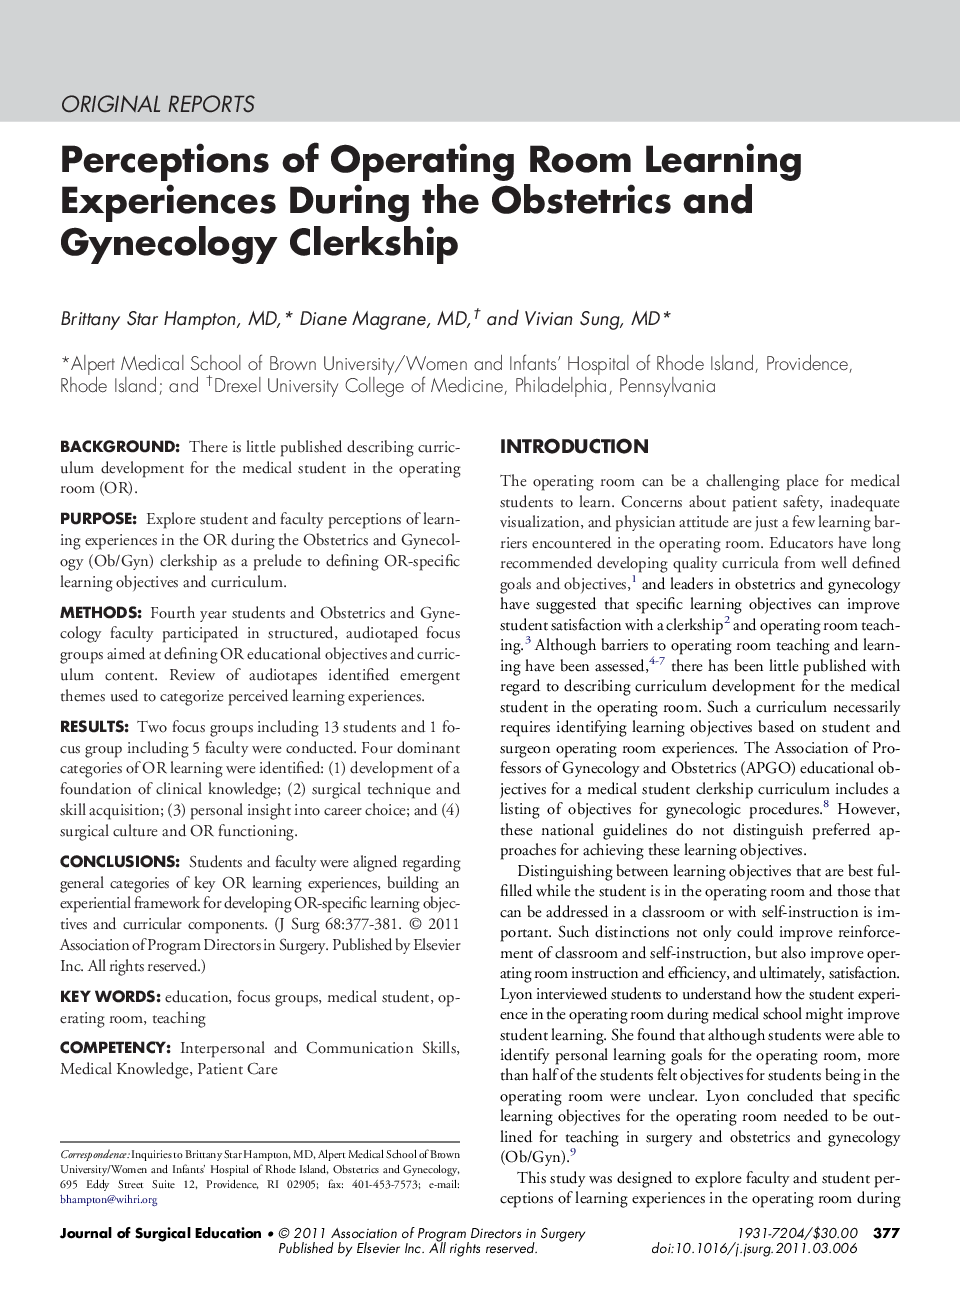 Perceptions of Operating Room Learning Experiences During the Obstetrics and Gynecology Clerkship